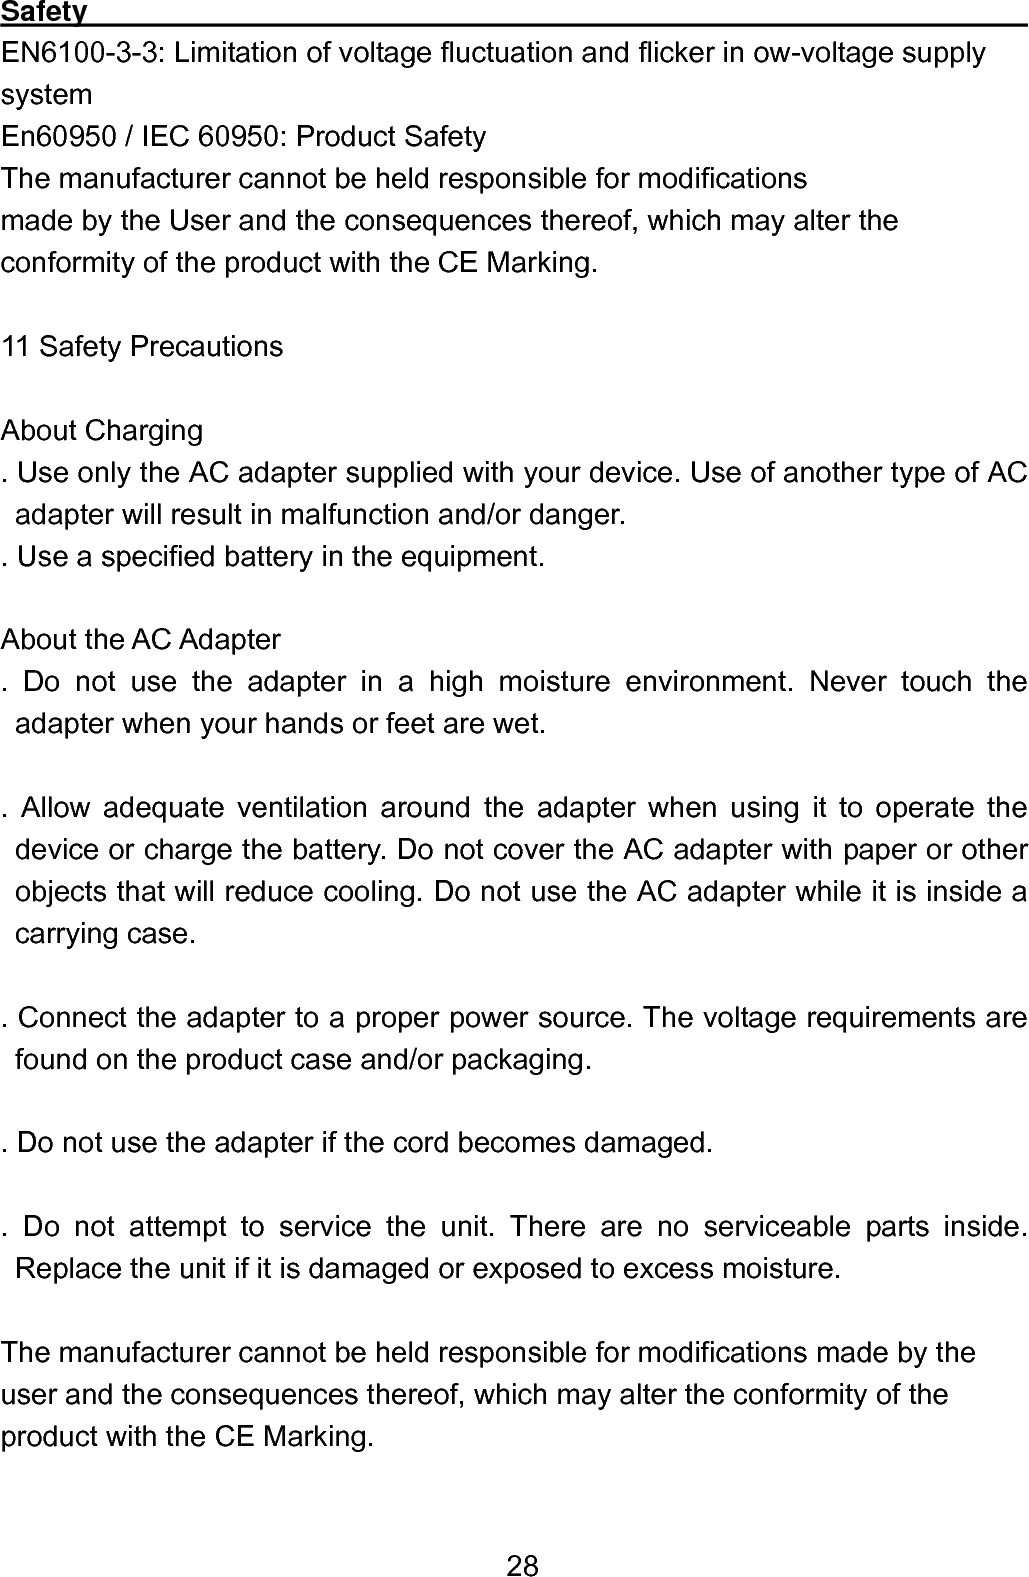  28Safety                                                                        EN6100-3-3: Limitation of voltage fluctuation and flicker in ow-voltage supply system En60950 / IEC 60950: Product Safety   The manufacturer cannot be held responsible for modifications   made by the User and the consequences thereof, which may alter the conformity of the product with the CE Marking.  11 Safety Precautions  About Charging . Use only the AC adapter supplied with your device. Use of another type of AC adapter will result in malfunction and/or danger.   . Use a specified battery in the equipment.  About the AC Adapter . Do not use the adapter in a high moisture environment. Never touch the adapter when your hands or feet are wet.    . Allow adequate ventilation around the adapter when using it to operate the device or charge the battery. Do not cover the AC adapter with paper or other objects that will reduce cooling. Do not use the AC adapter while it is inside a carrying case.    . Connect the adapter to a proper power source. The voltage requirements are found on the product case and/or packaging.    . Do not use the adapter if the cord becomes damaged.    . Do not attempt to service the unit. There are no serviceable parts inside.     Replace the unit if it is damaged or exposed to excess moisture.  The manufacturer cannot be held responsible for modifications made by the user and the consequences thereof, which may alter the conformity of the product with the CE Marking.  